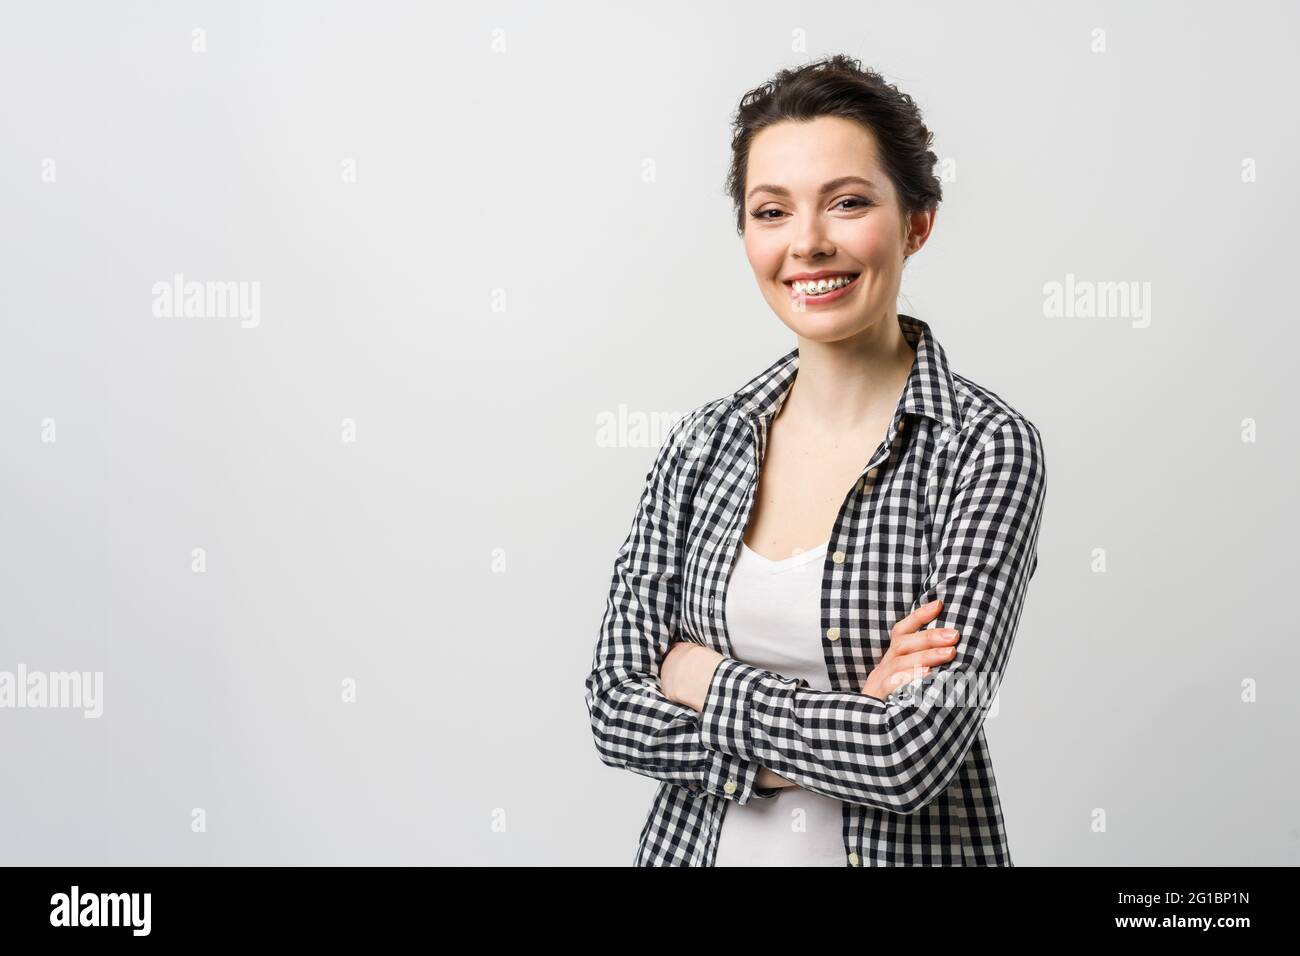 Business portrait of a young woman. A charming brunette looks at the camera, crossing her arms over her chest. Stock Photo